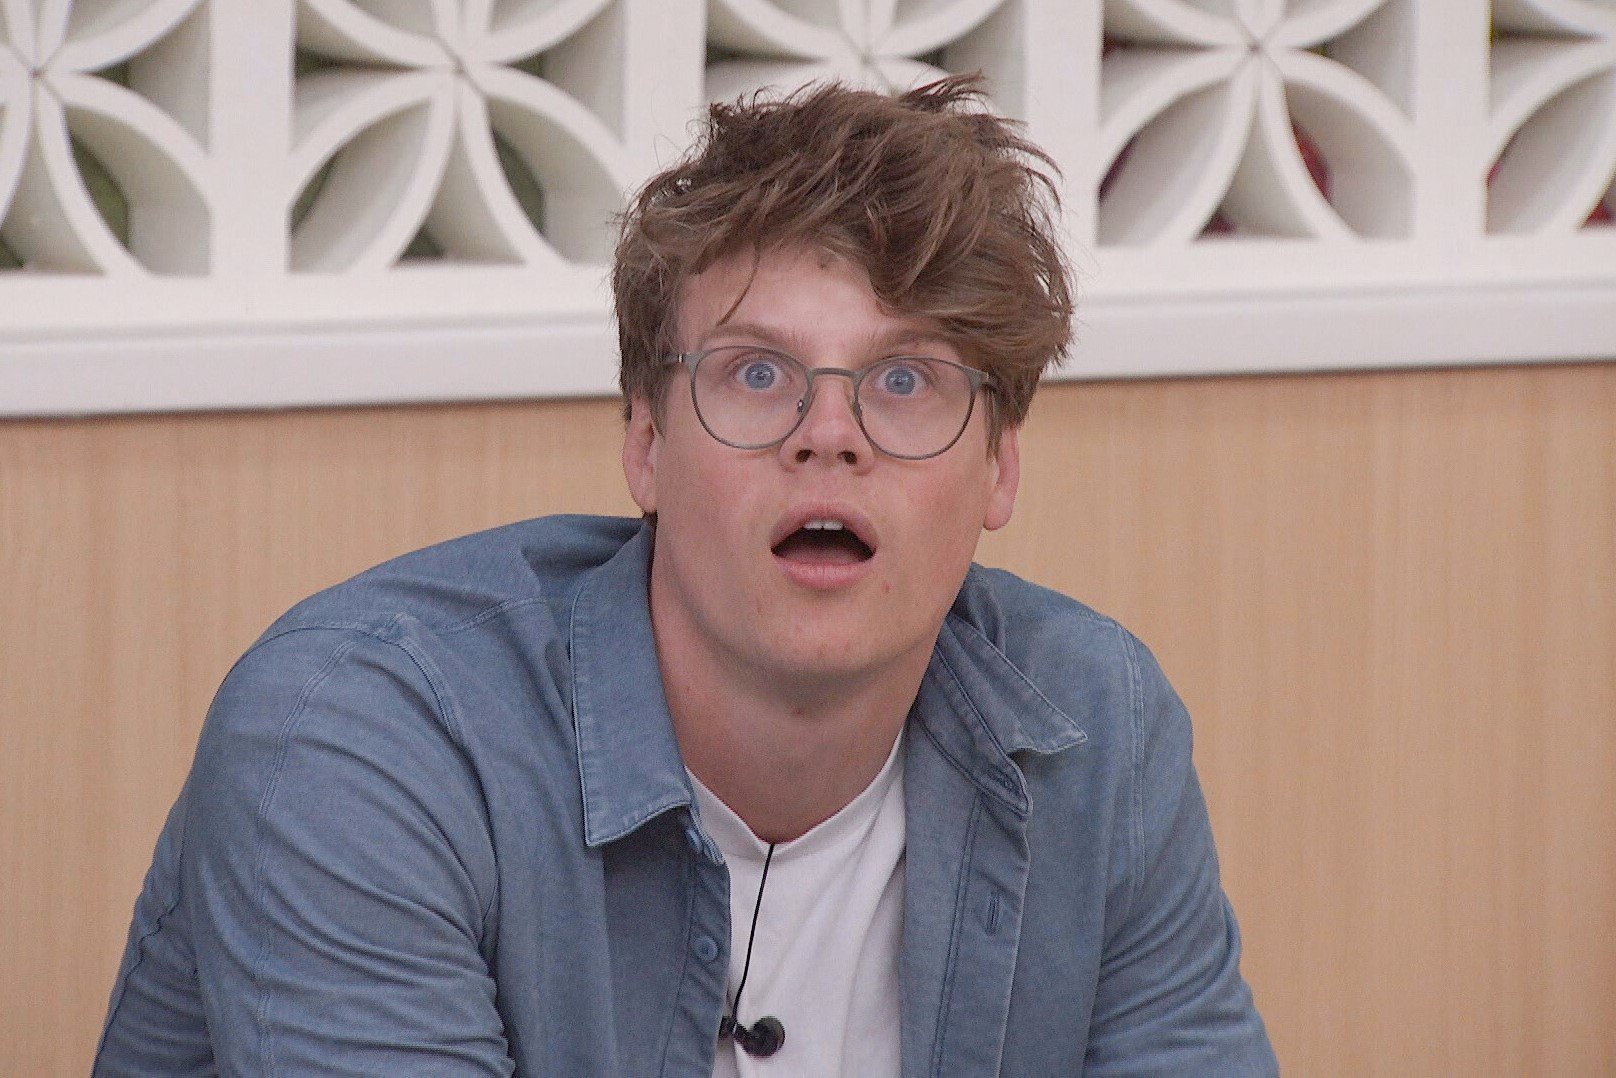 Kyle Capener, who stars in 'Big Brother 24' on CBS, wears a blue long-sleeved button-up shirt over a white shirt and glasses.